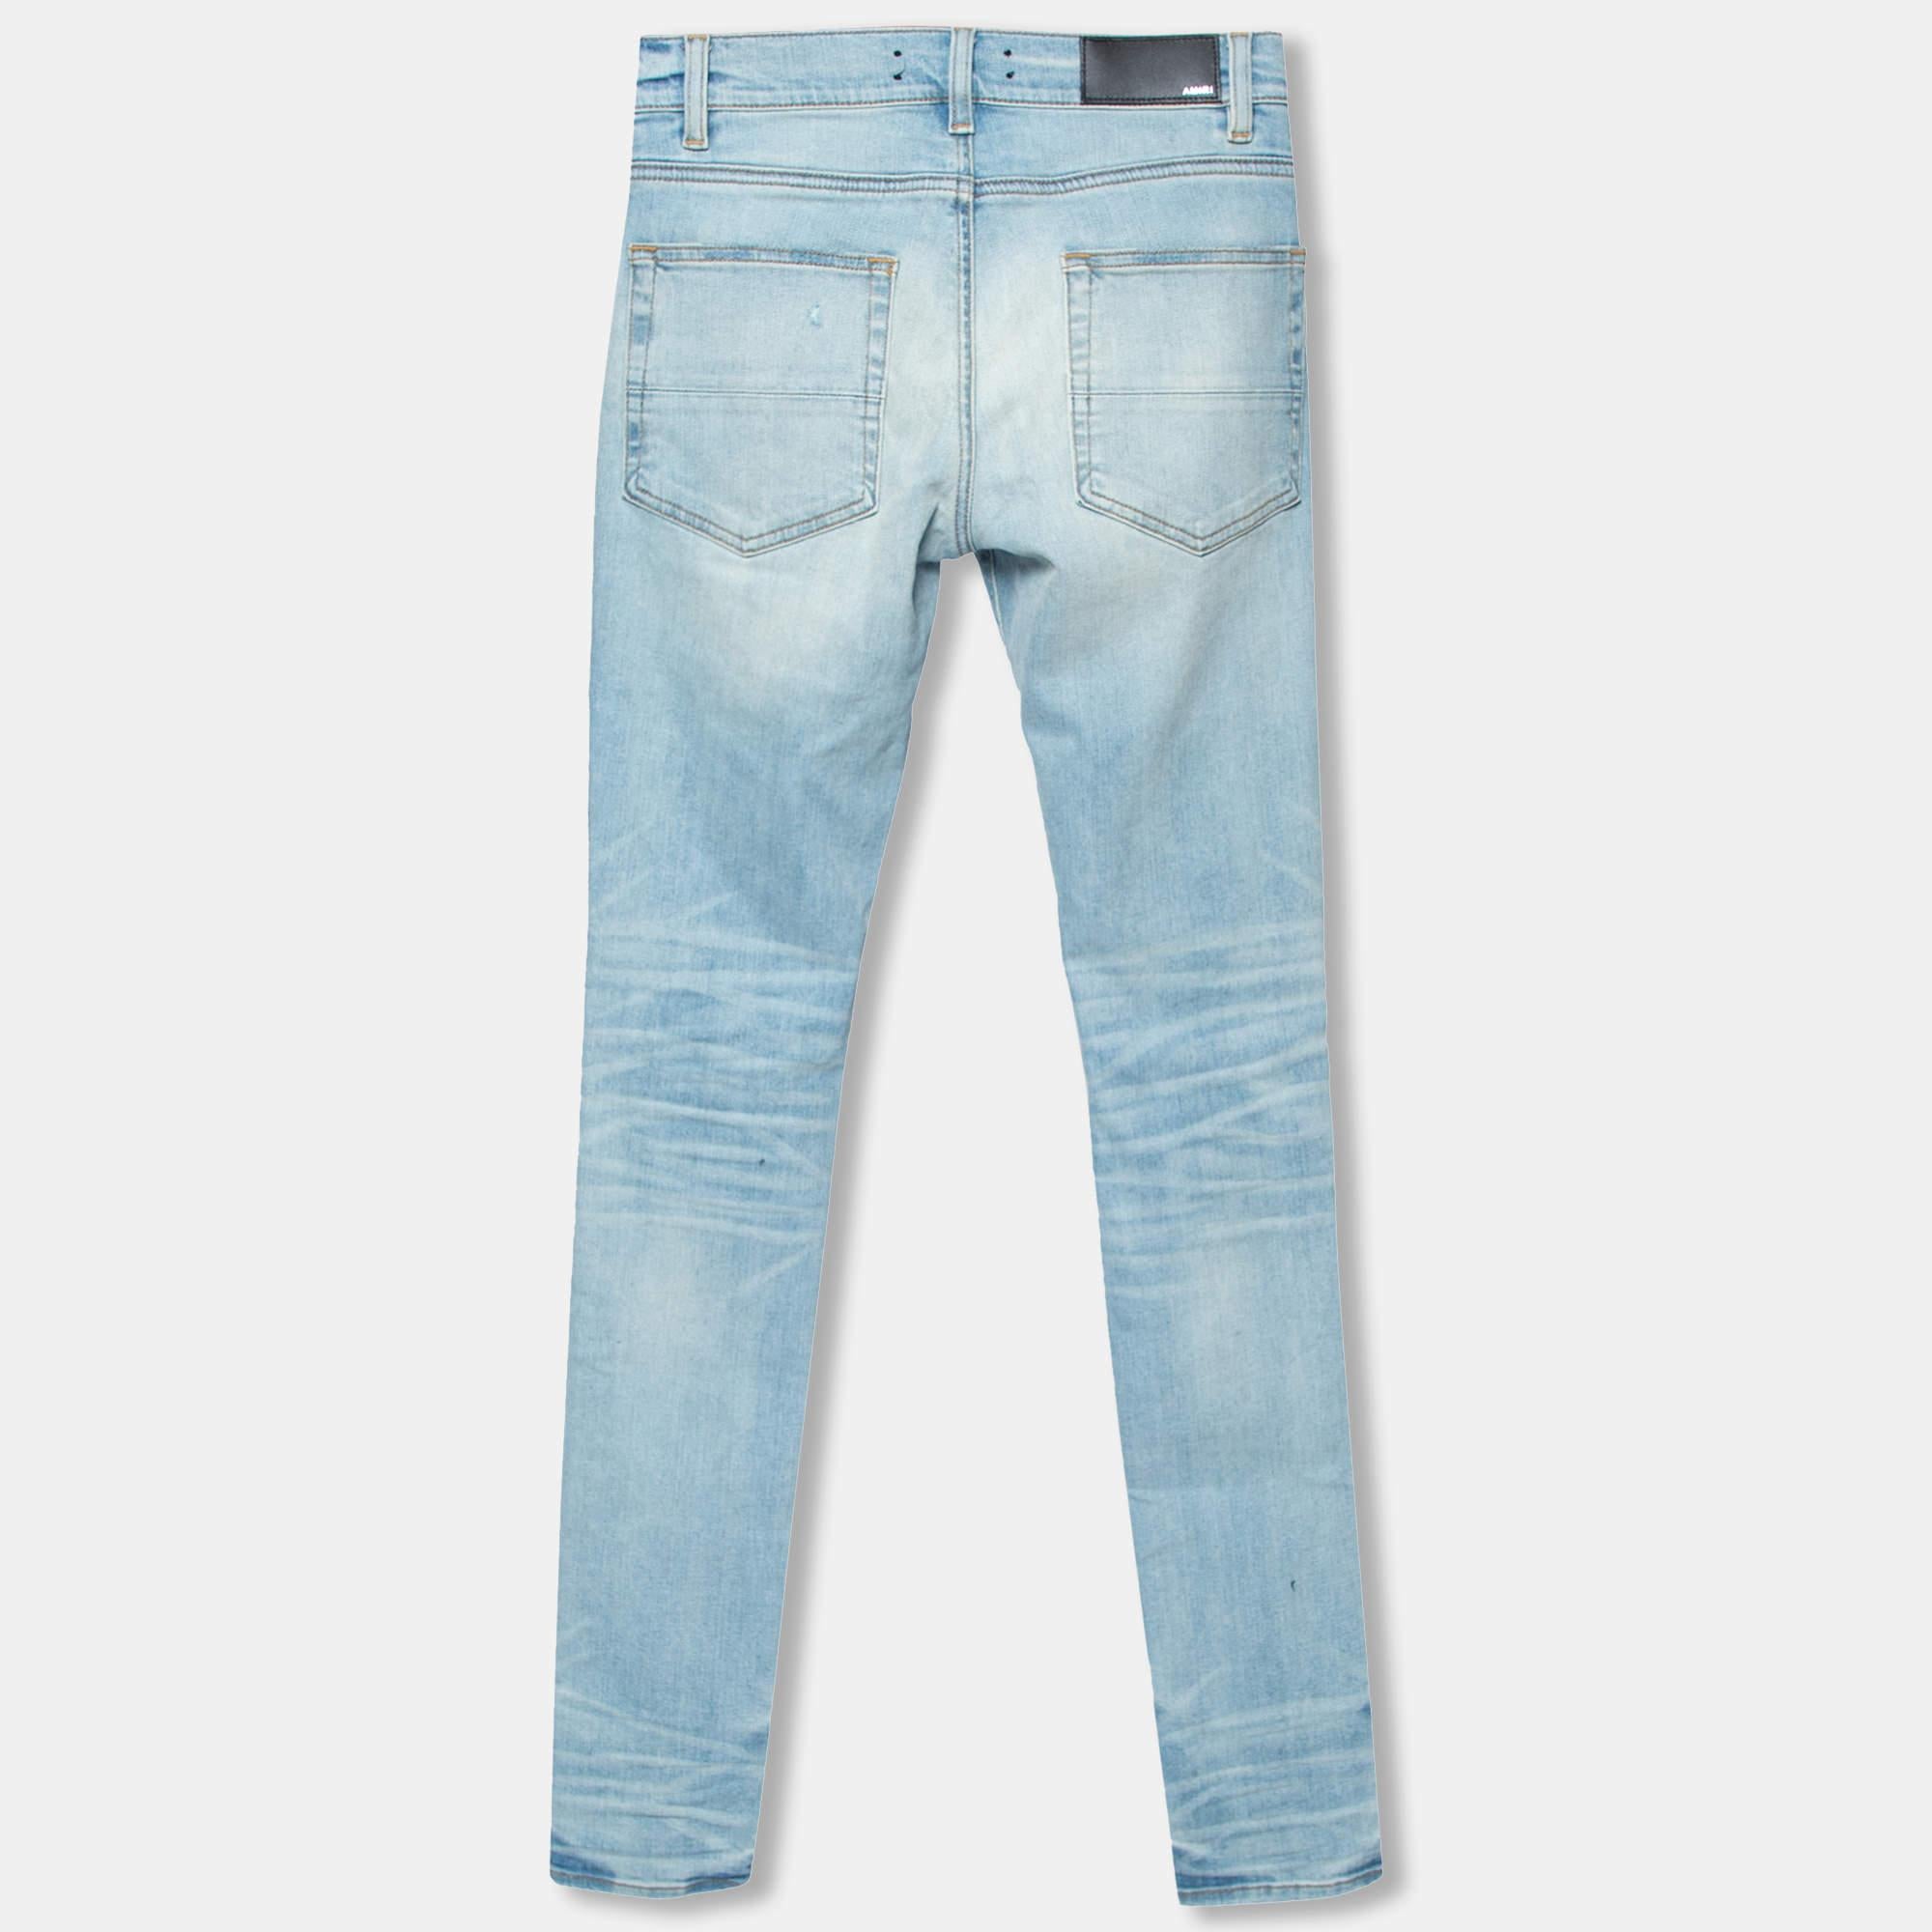 These stunning skinny jeans come from Amiri. They are created using light-wash denim fabric, which is enriched with distressed detailing. They are provided with a zipper closure and five external pockets. These jeans are tailored to offer a good fit